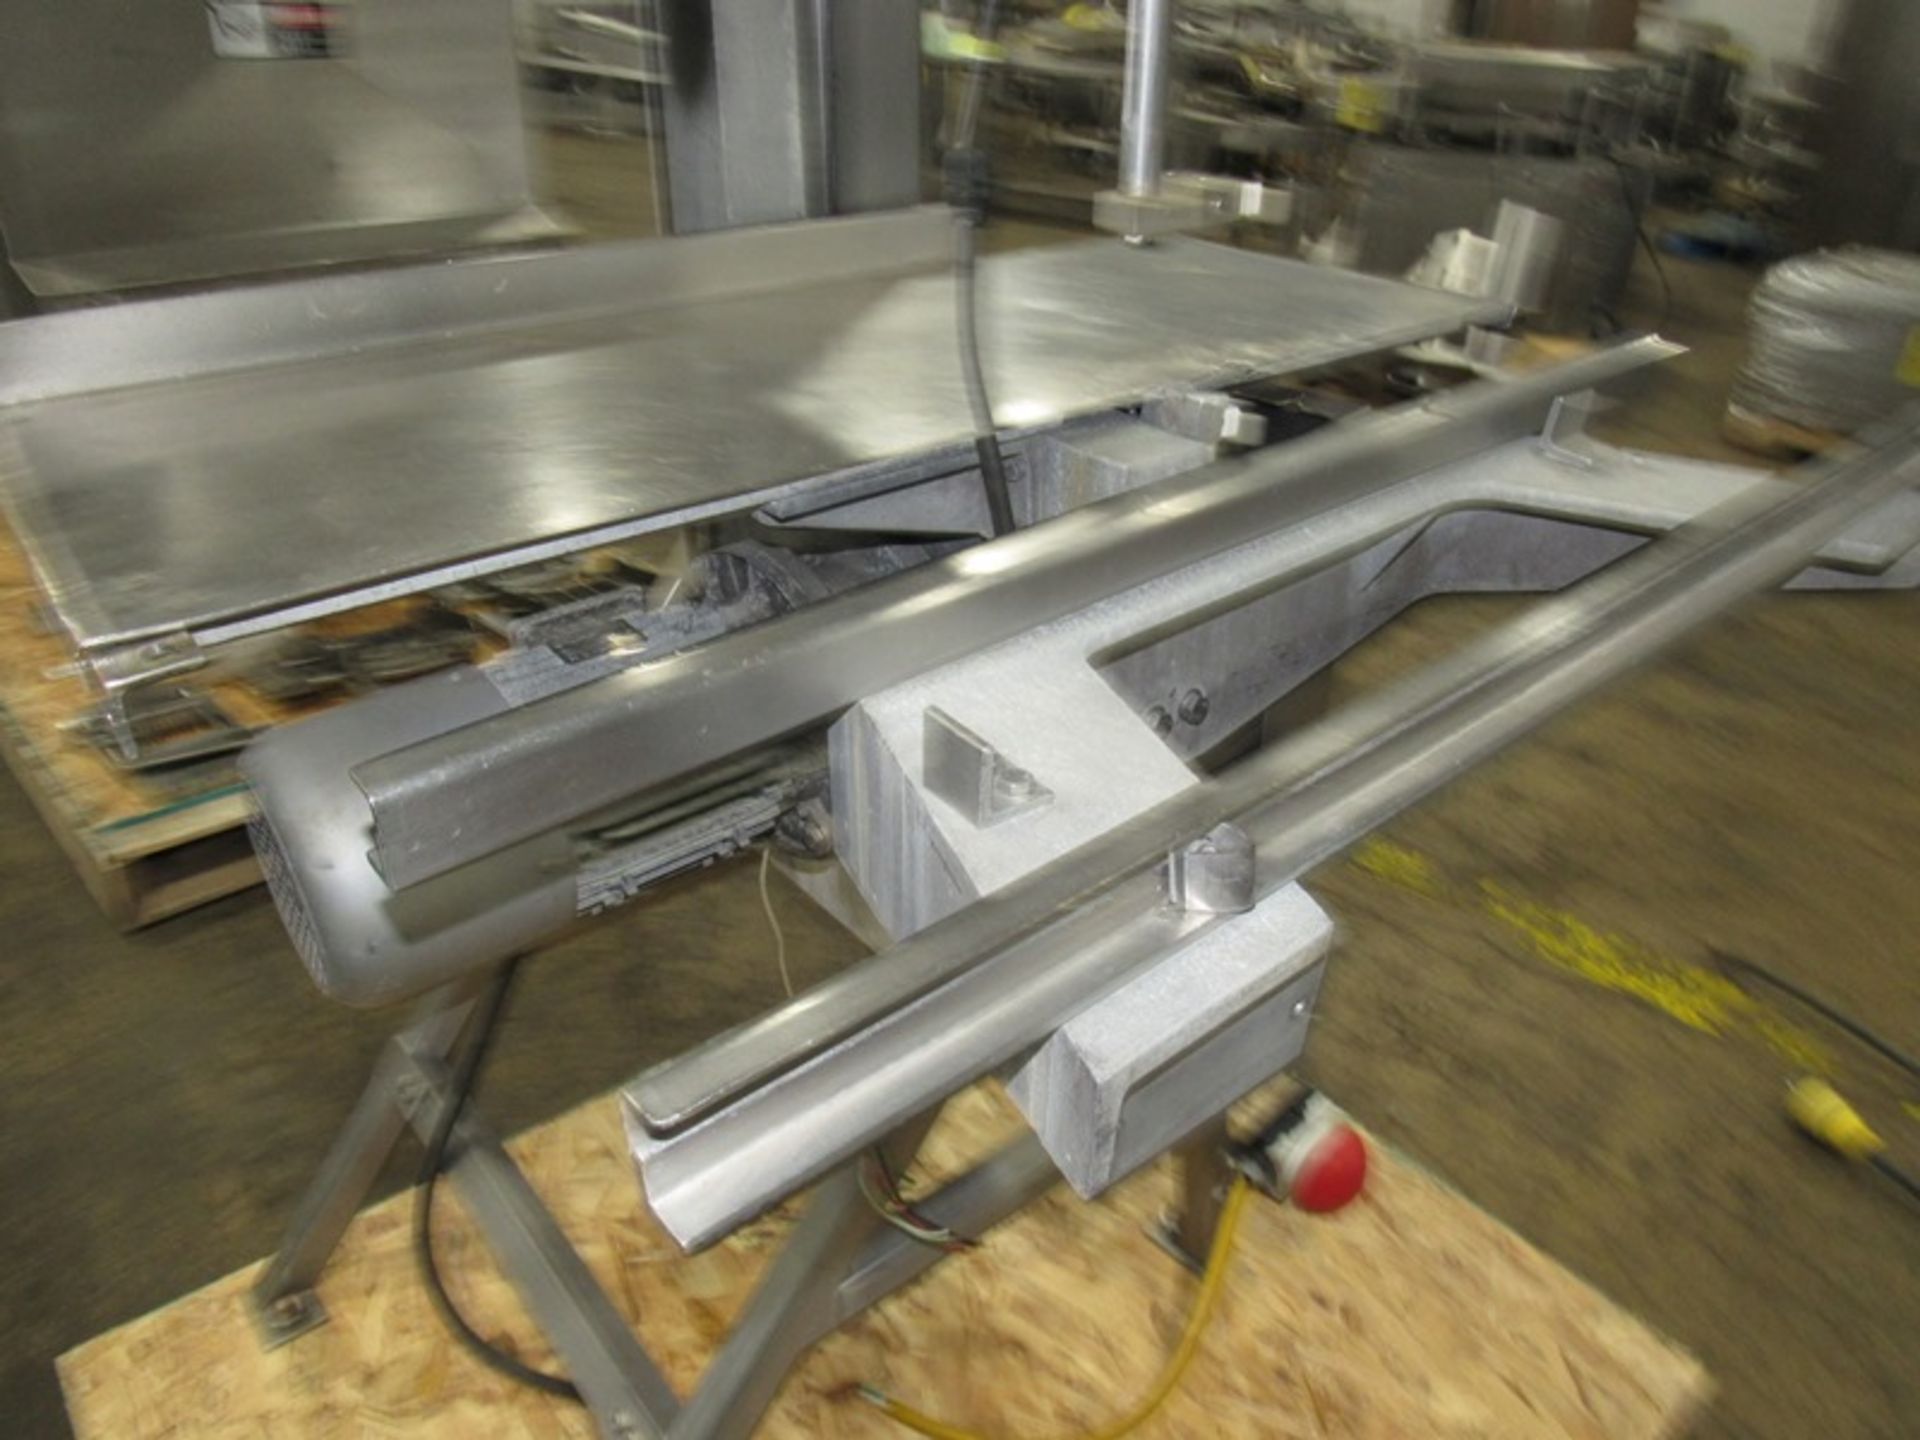 AEW Mdl. 400 Band Saw, aluminum head, missing moveable table and motor cover (Located in Plano, IL) - Image 4 of 6